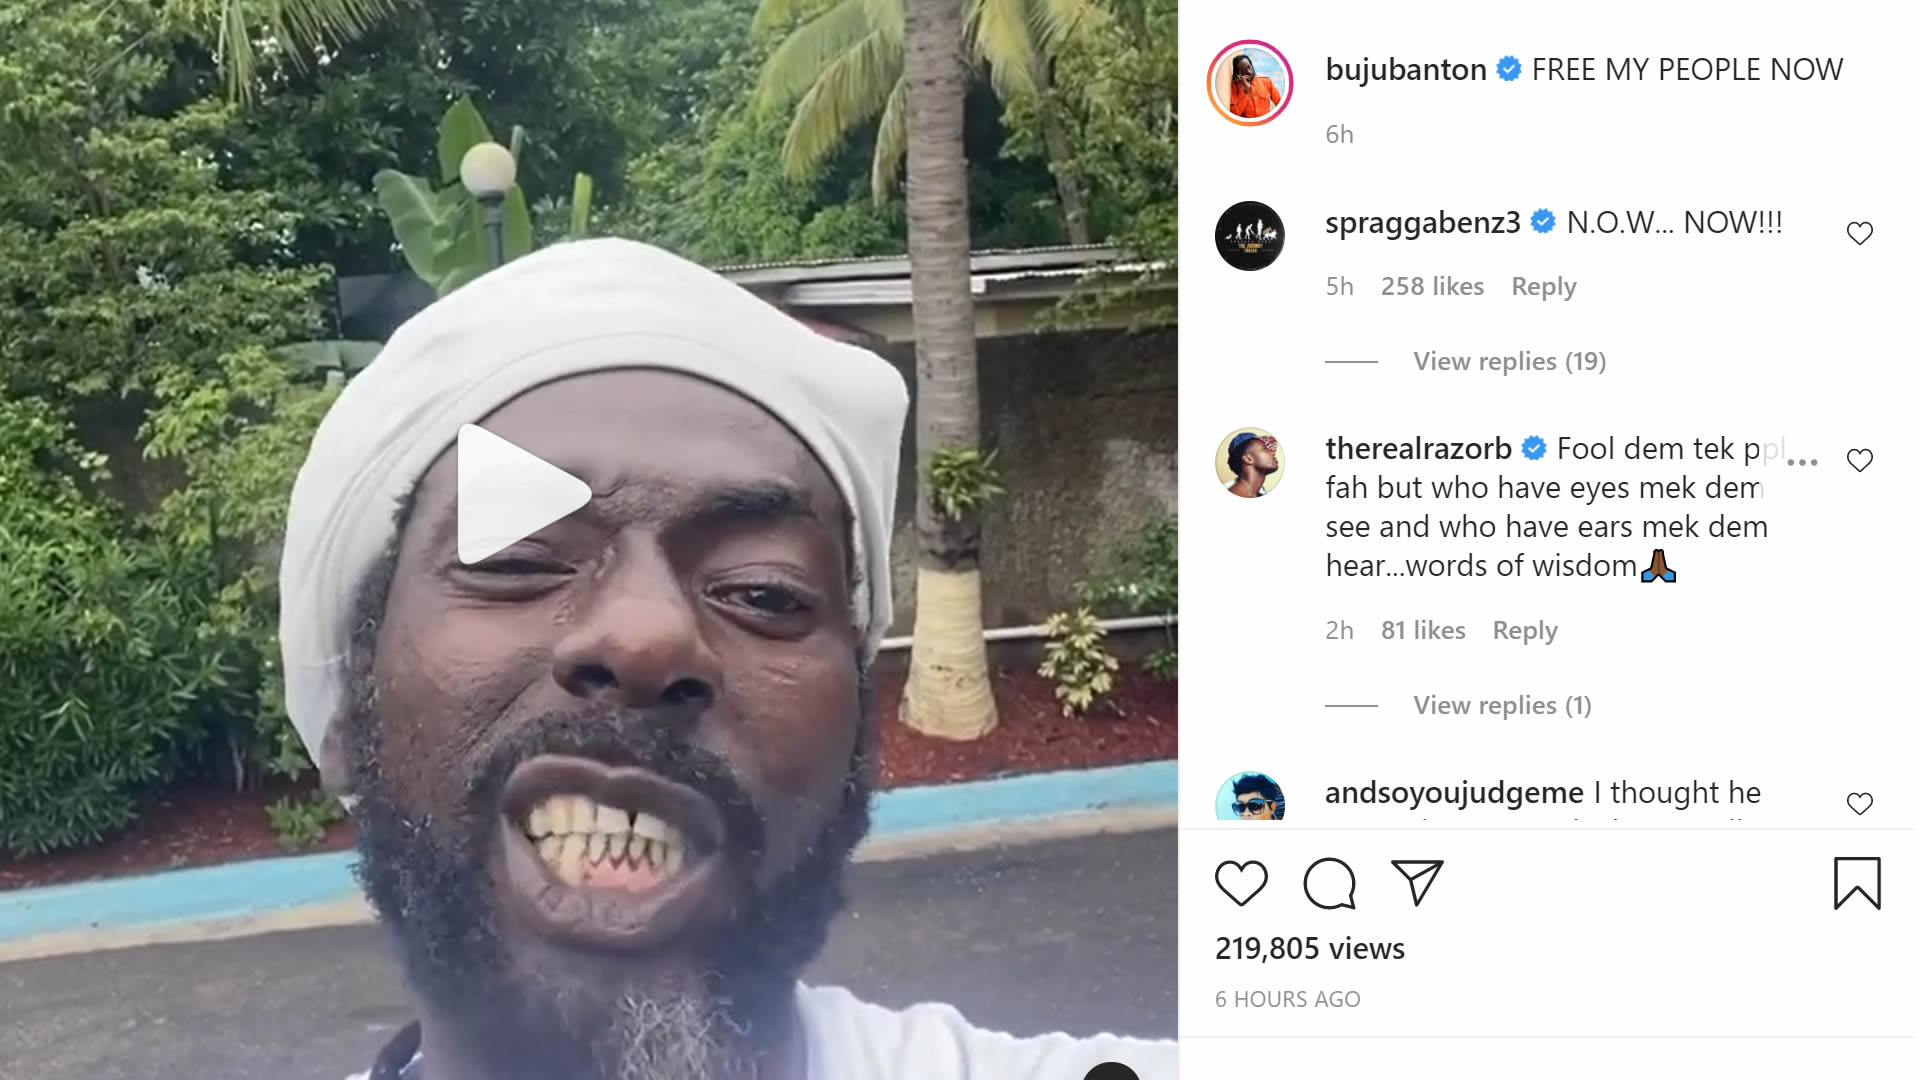 Buju Banton calls for an end to mask-wearing in Jamaica, 'Who Fi Dead Ago Dead'